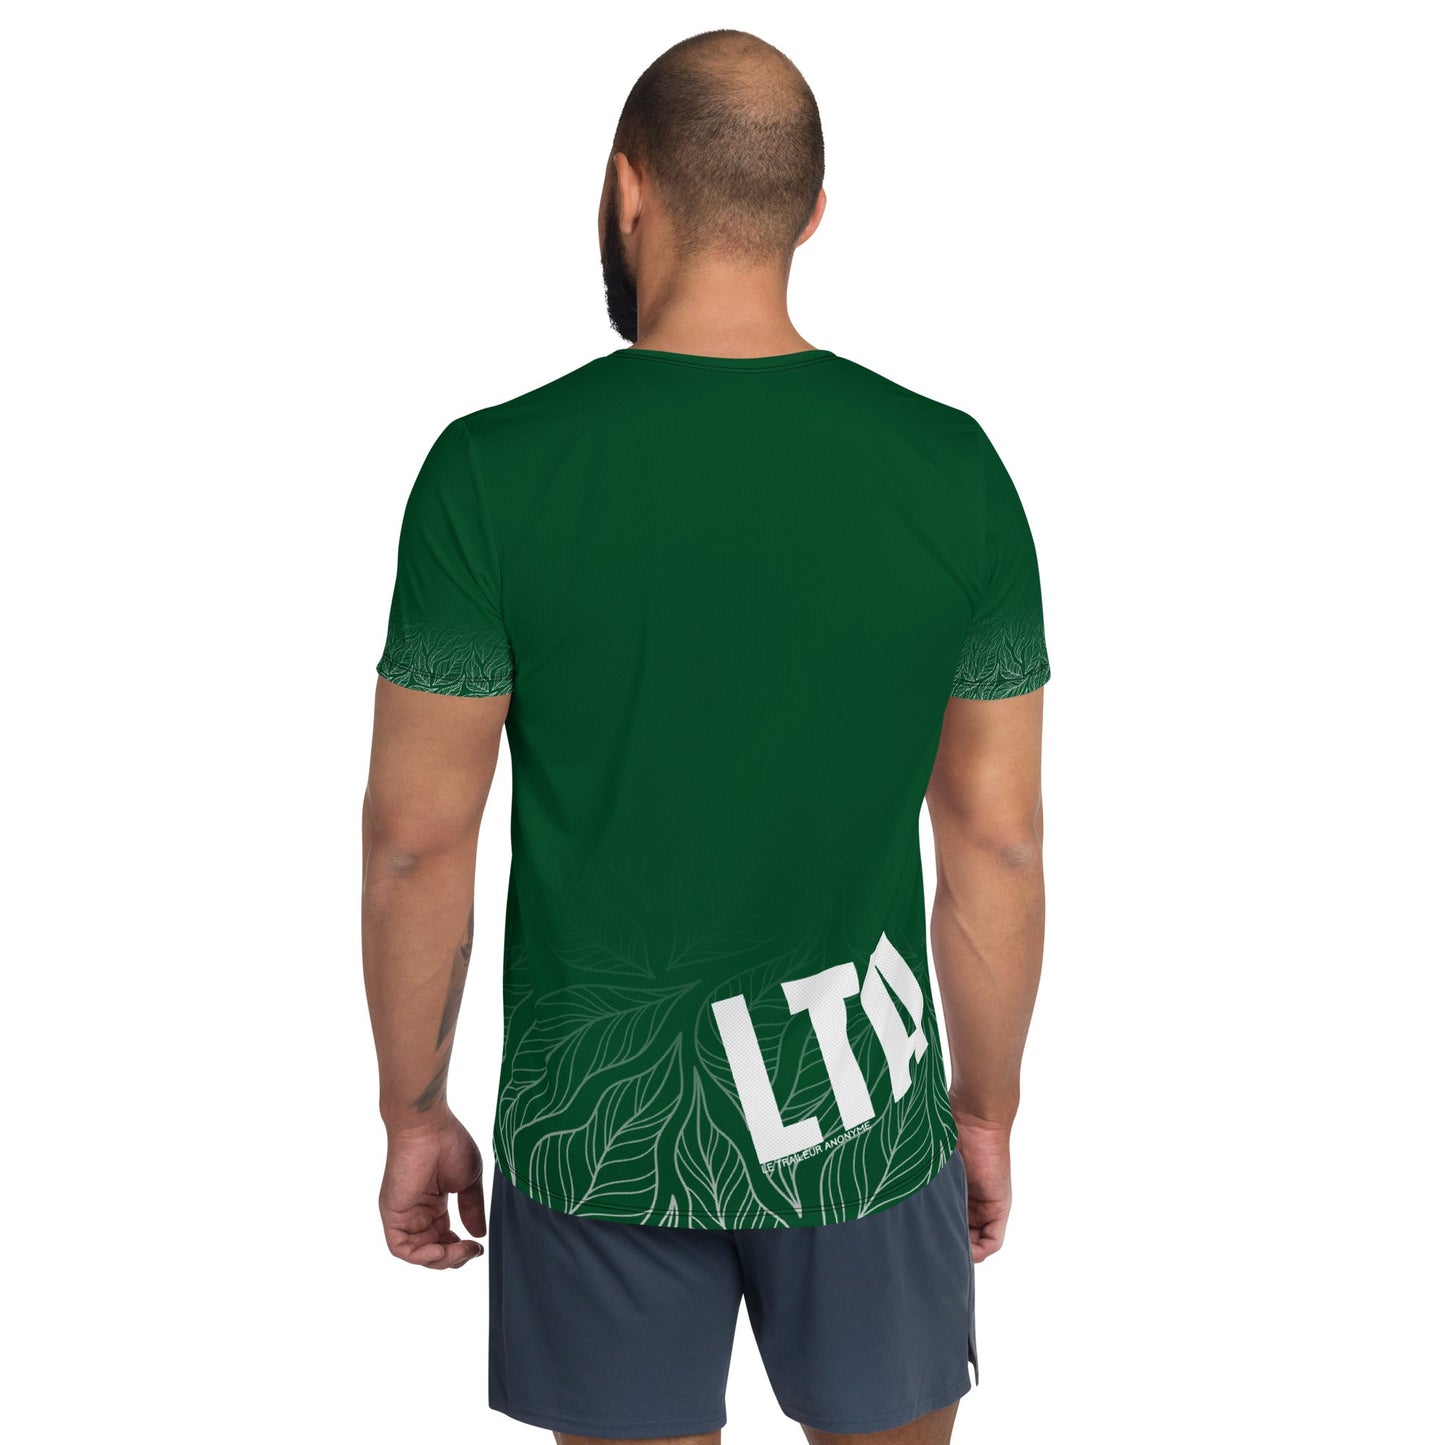 T-Shirt Running Homme - Green Forest - Le Traileur Anonyme